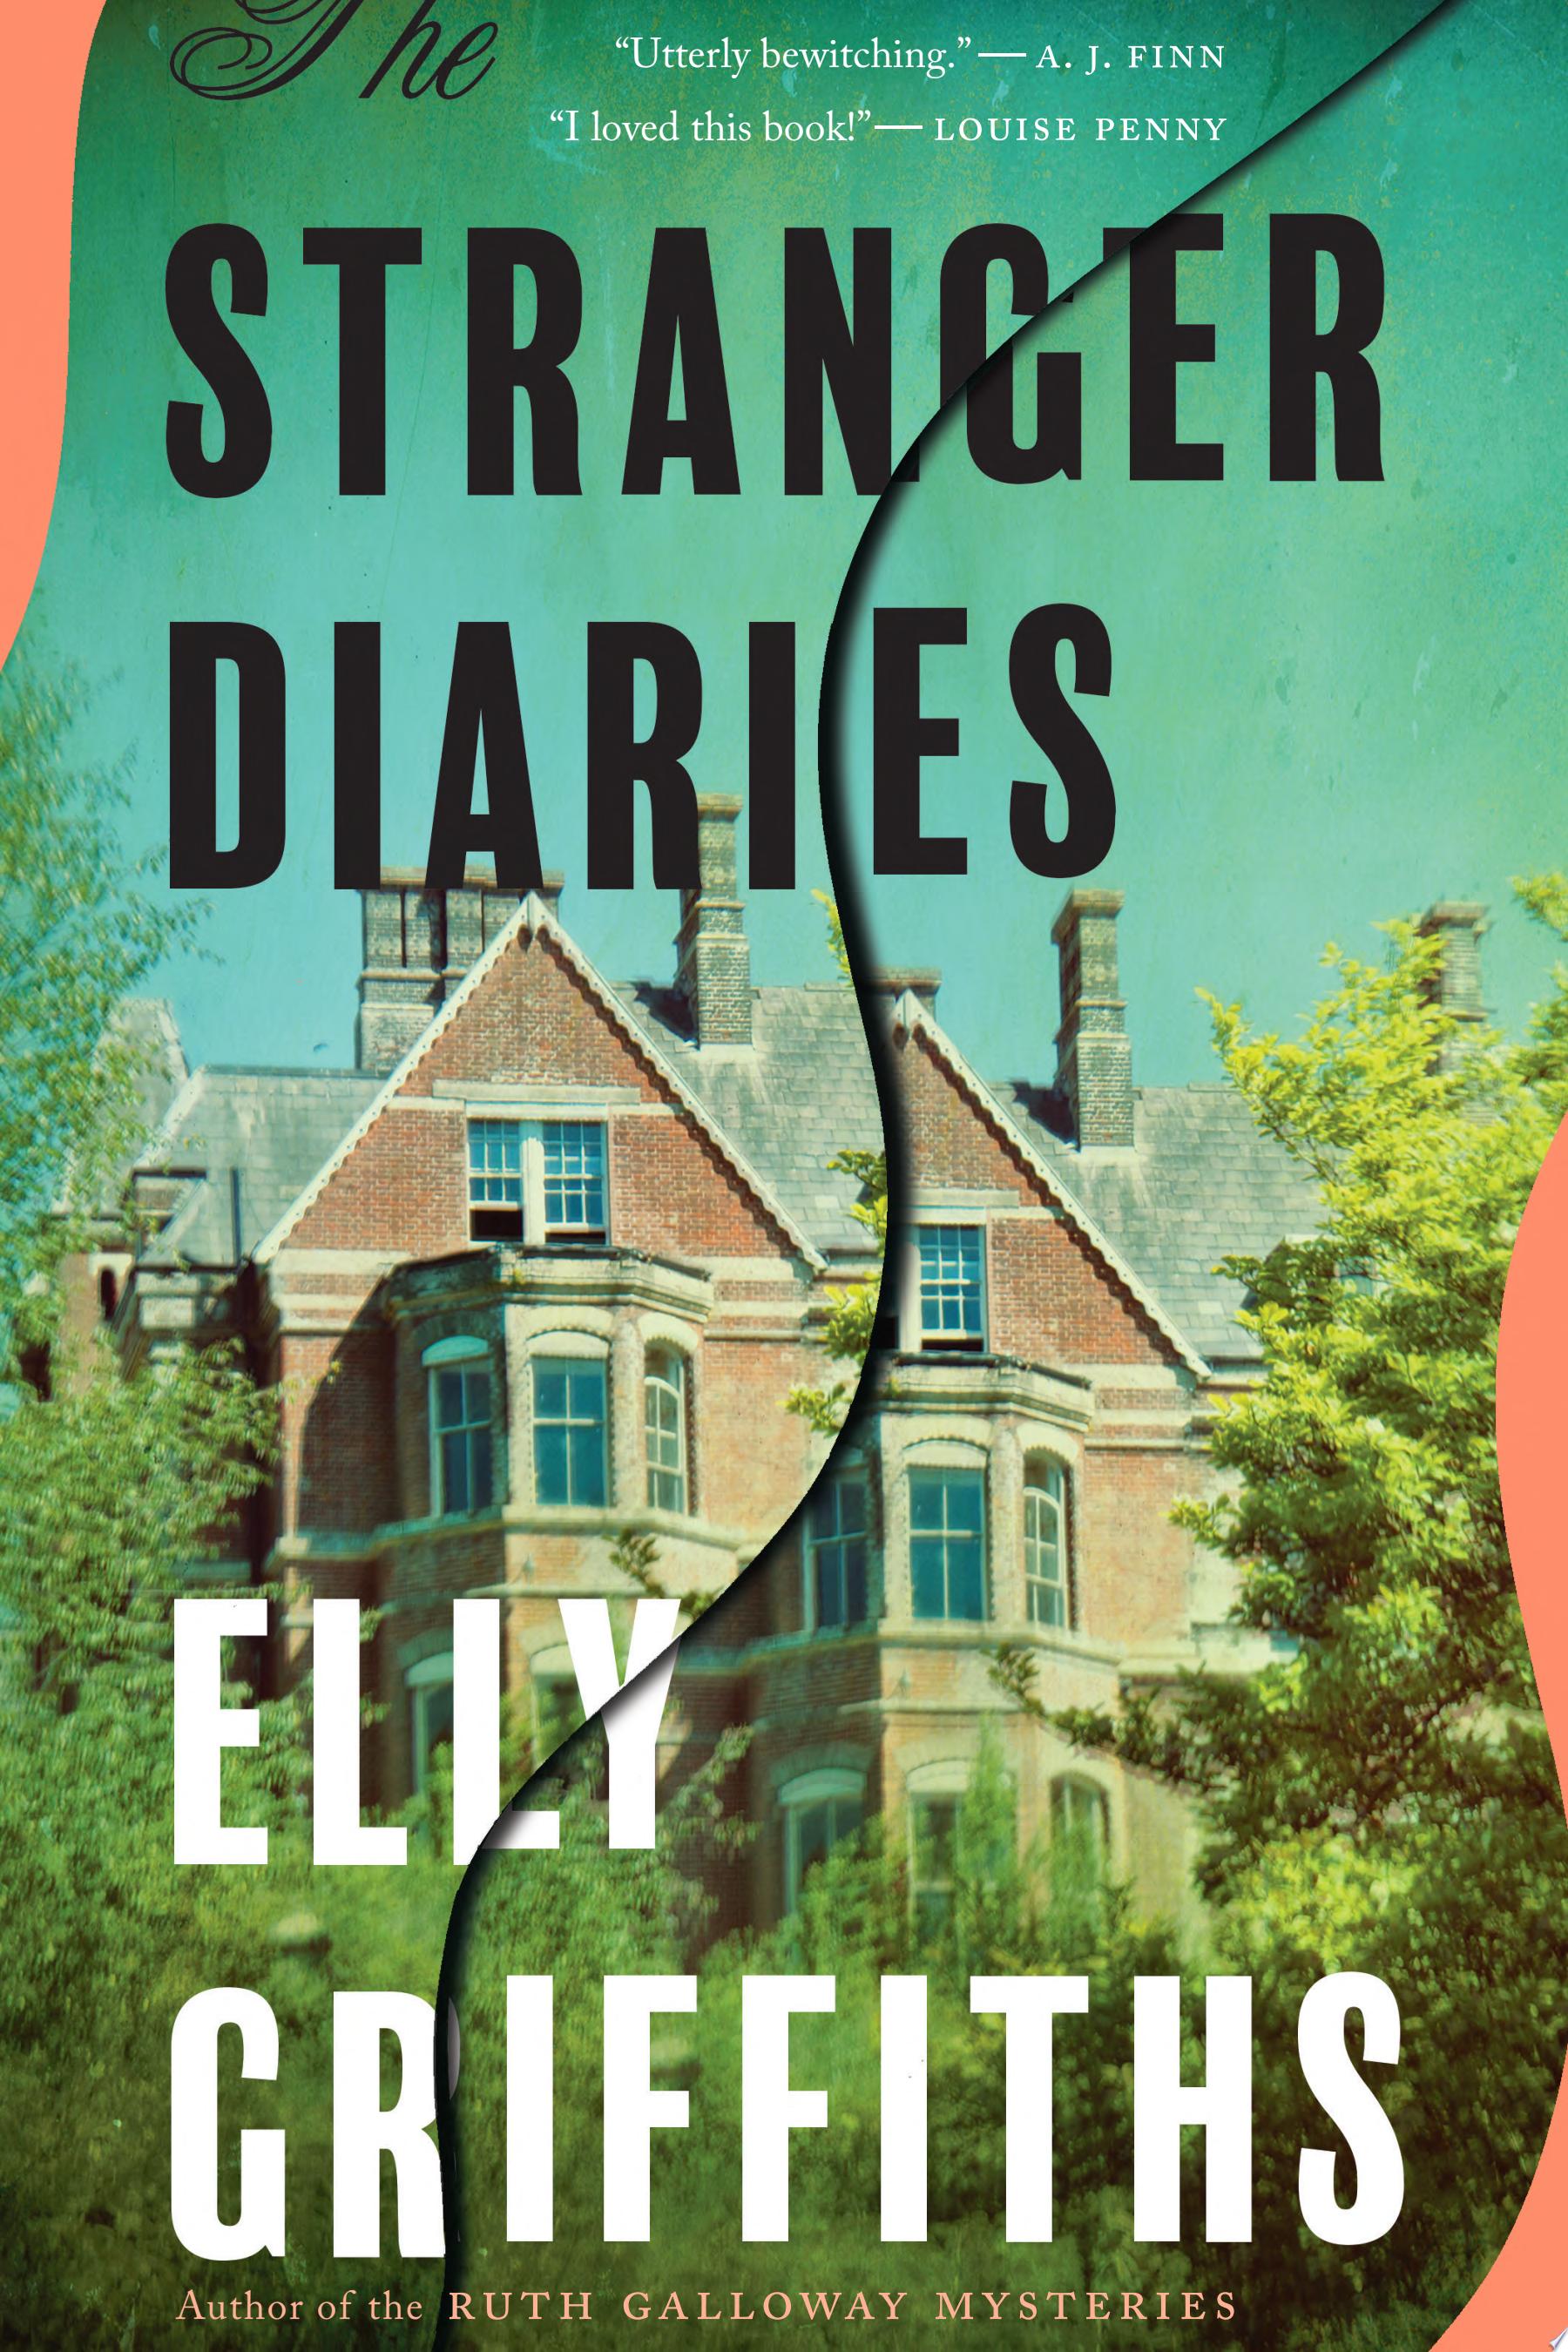 Image for "The Stranger Diaries"